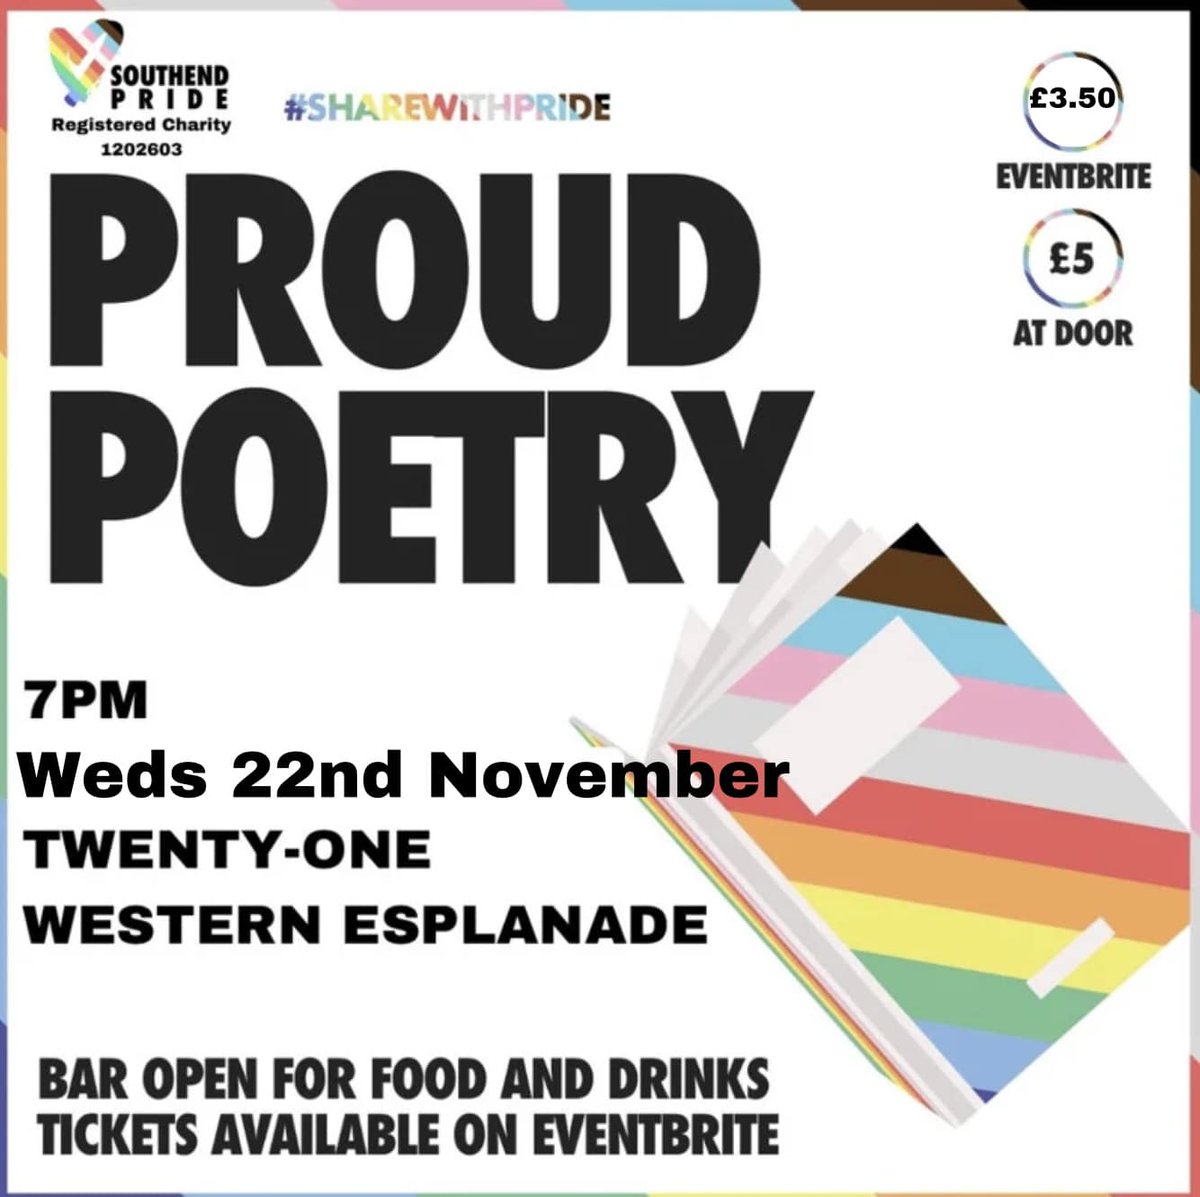 Proud Poetry is back! Always a popular event, grab your tickets now! Link below for tickets: southendpride.square.site/.../proud_poet… #Essex #southendpride #pride🌈 #lgbtq🌈 #southendonsea #southendonseaessex Southend Pride Registered Charity No. 1202603